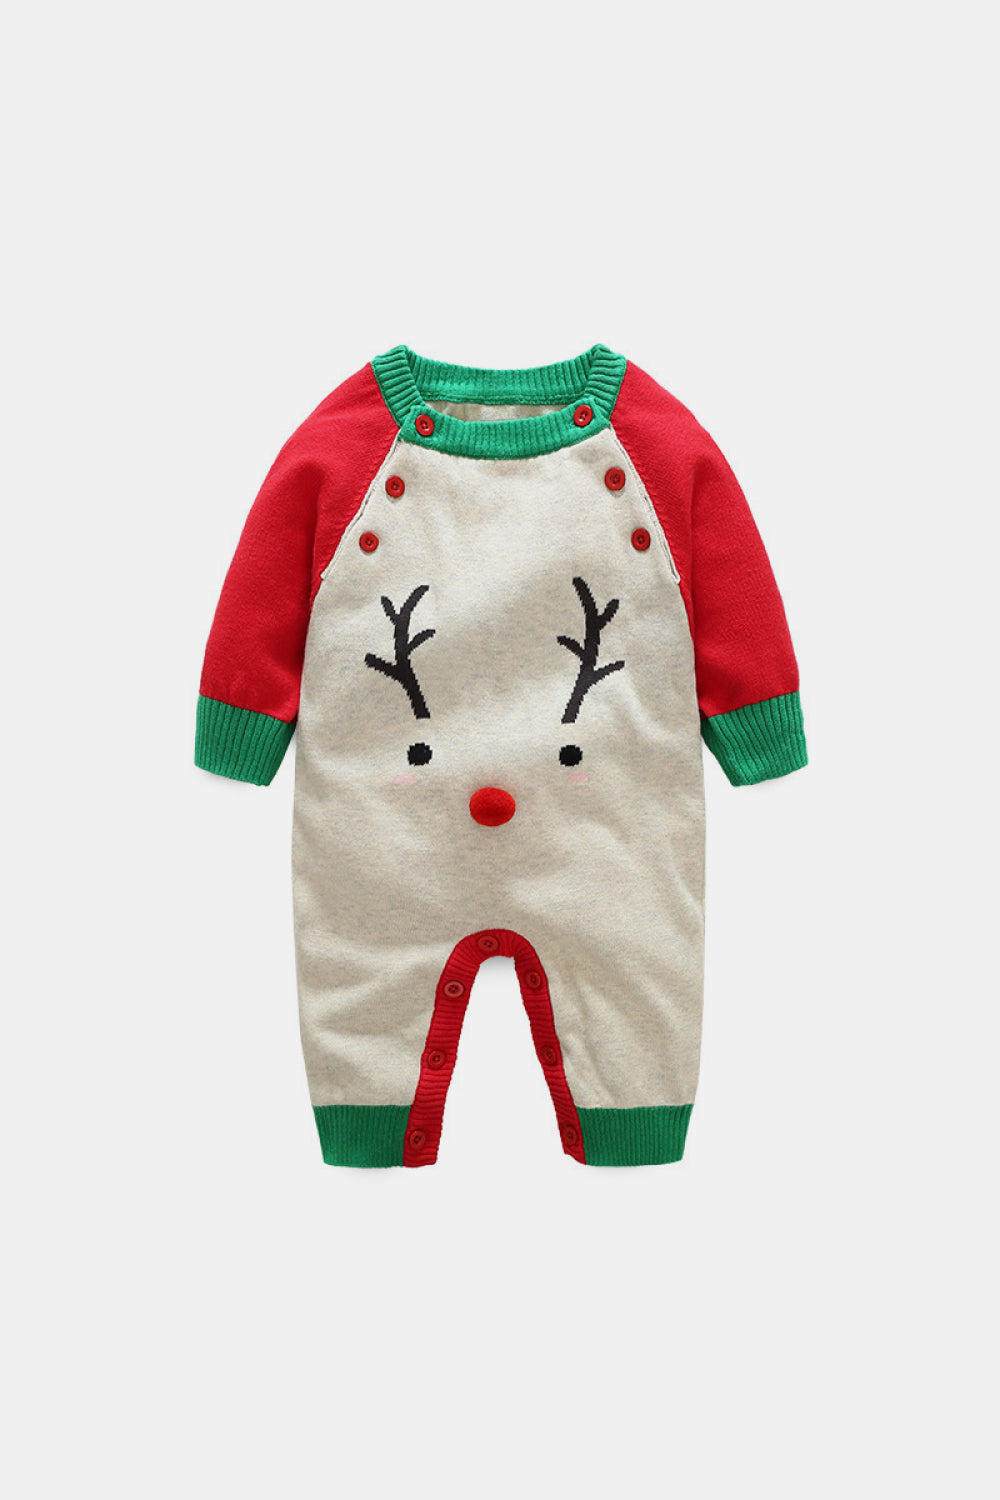 Baby Unisex Rudolph Graphic Knit Jumpsuit - Edy's Treasures